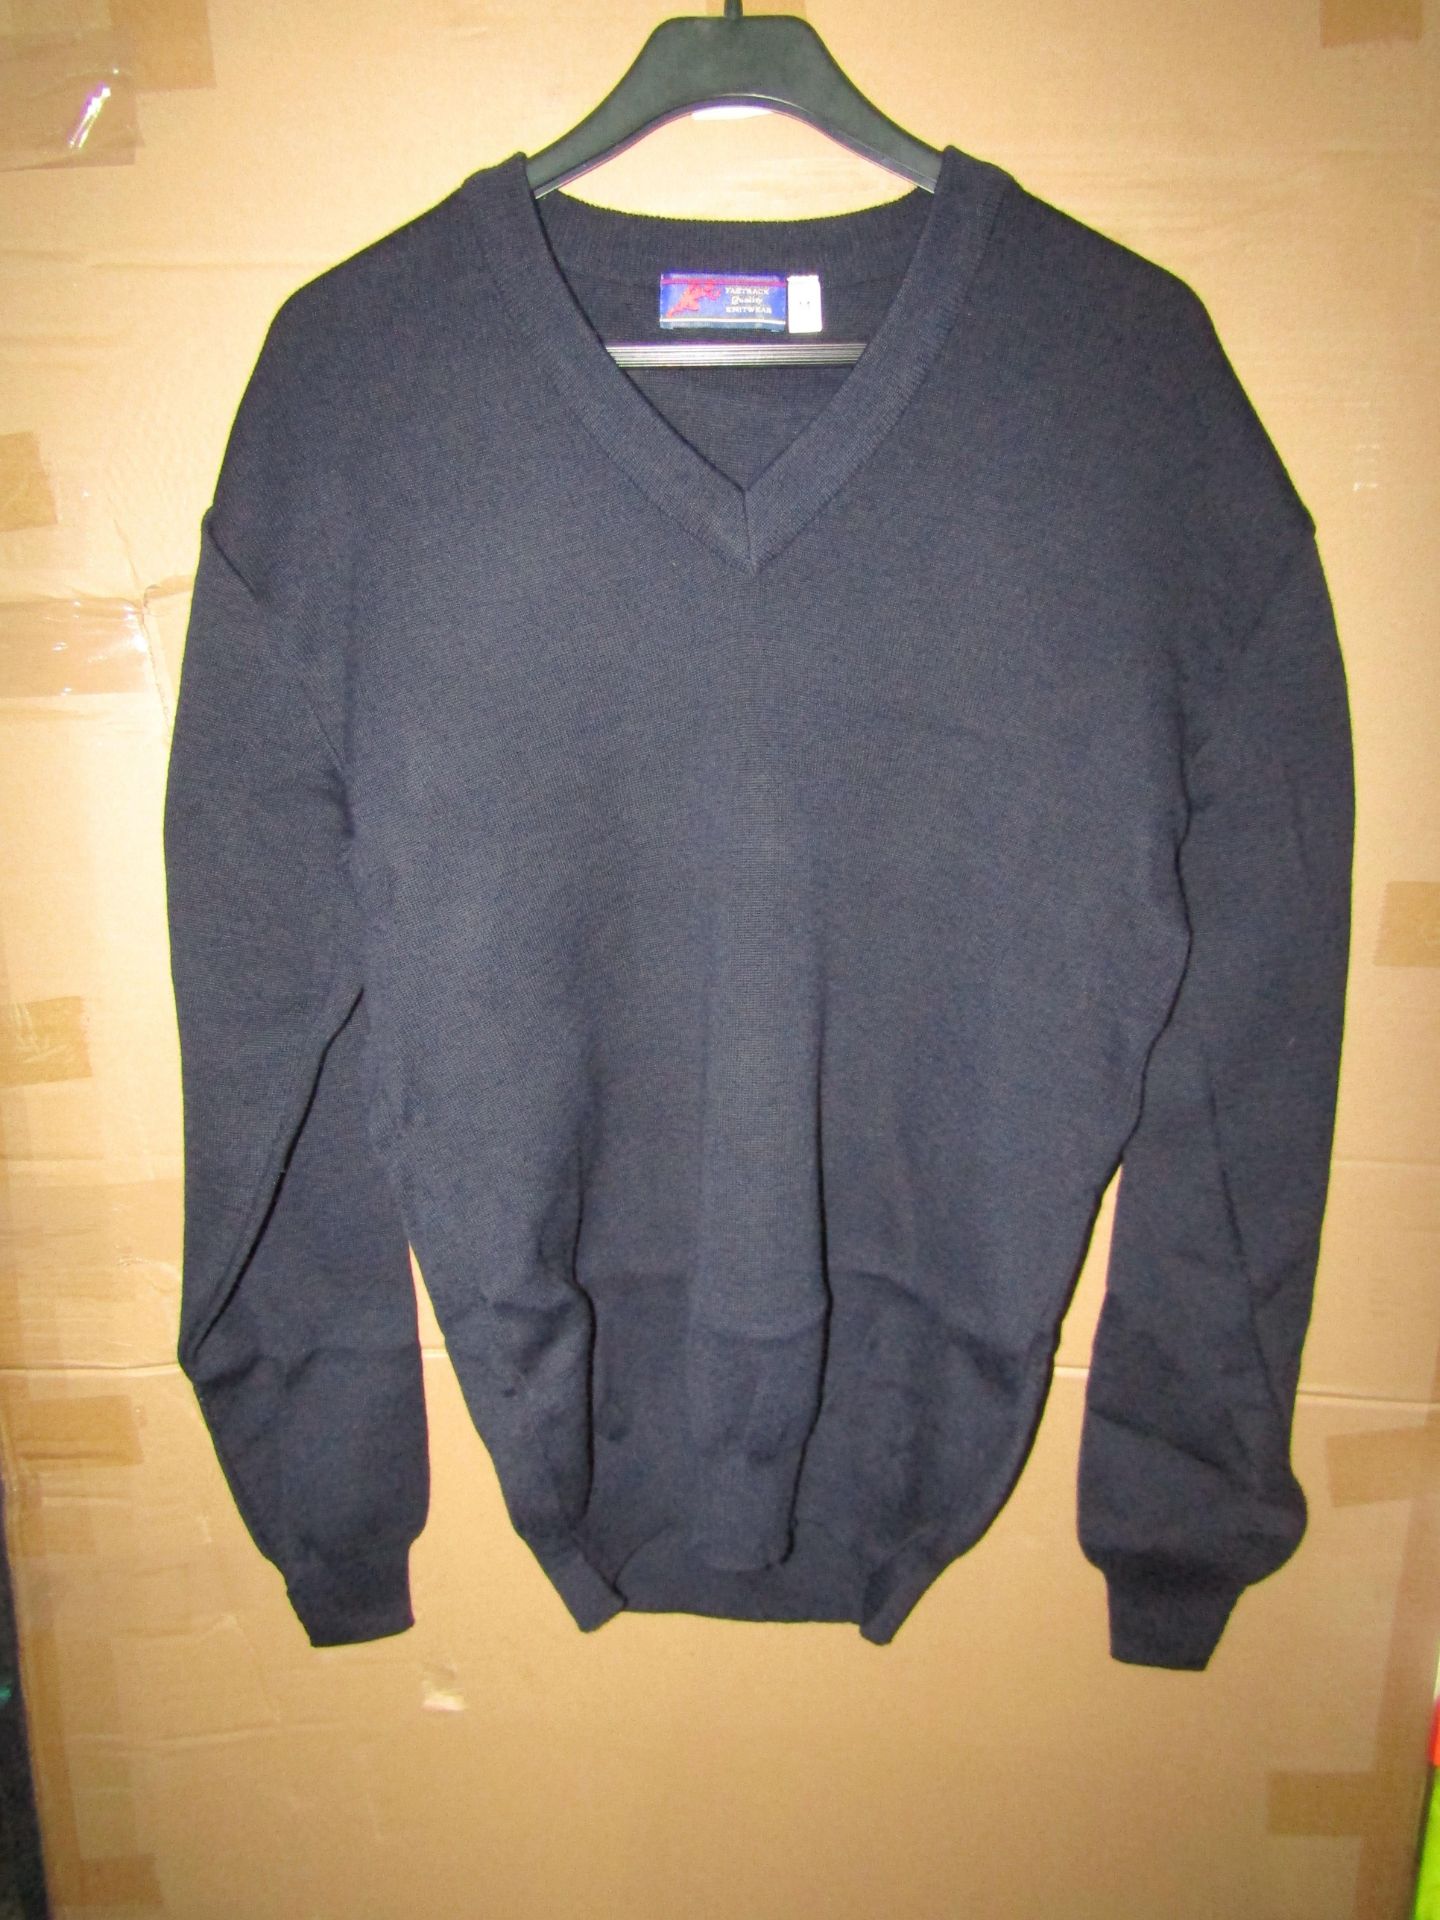 2x Unbranded - Navy Knitted Jumper - Size 4XL - Unused & Packaged.